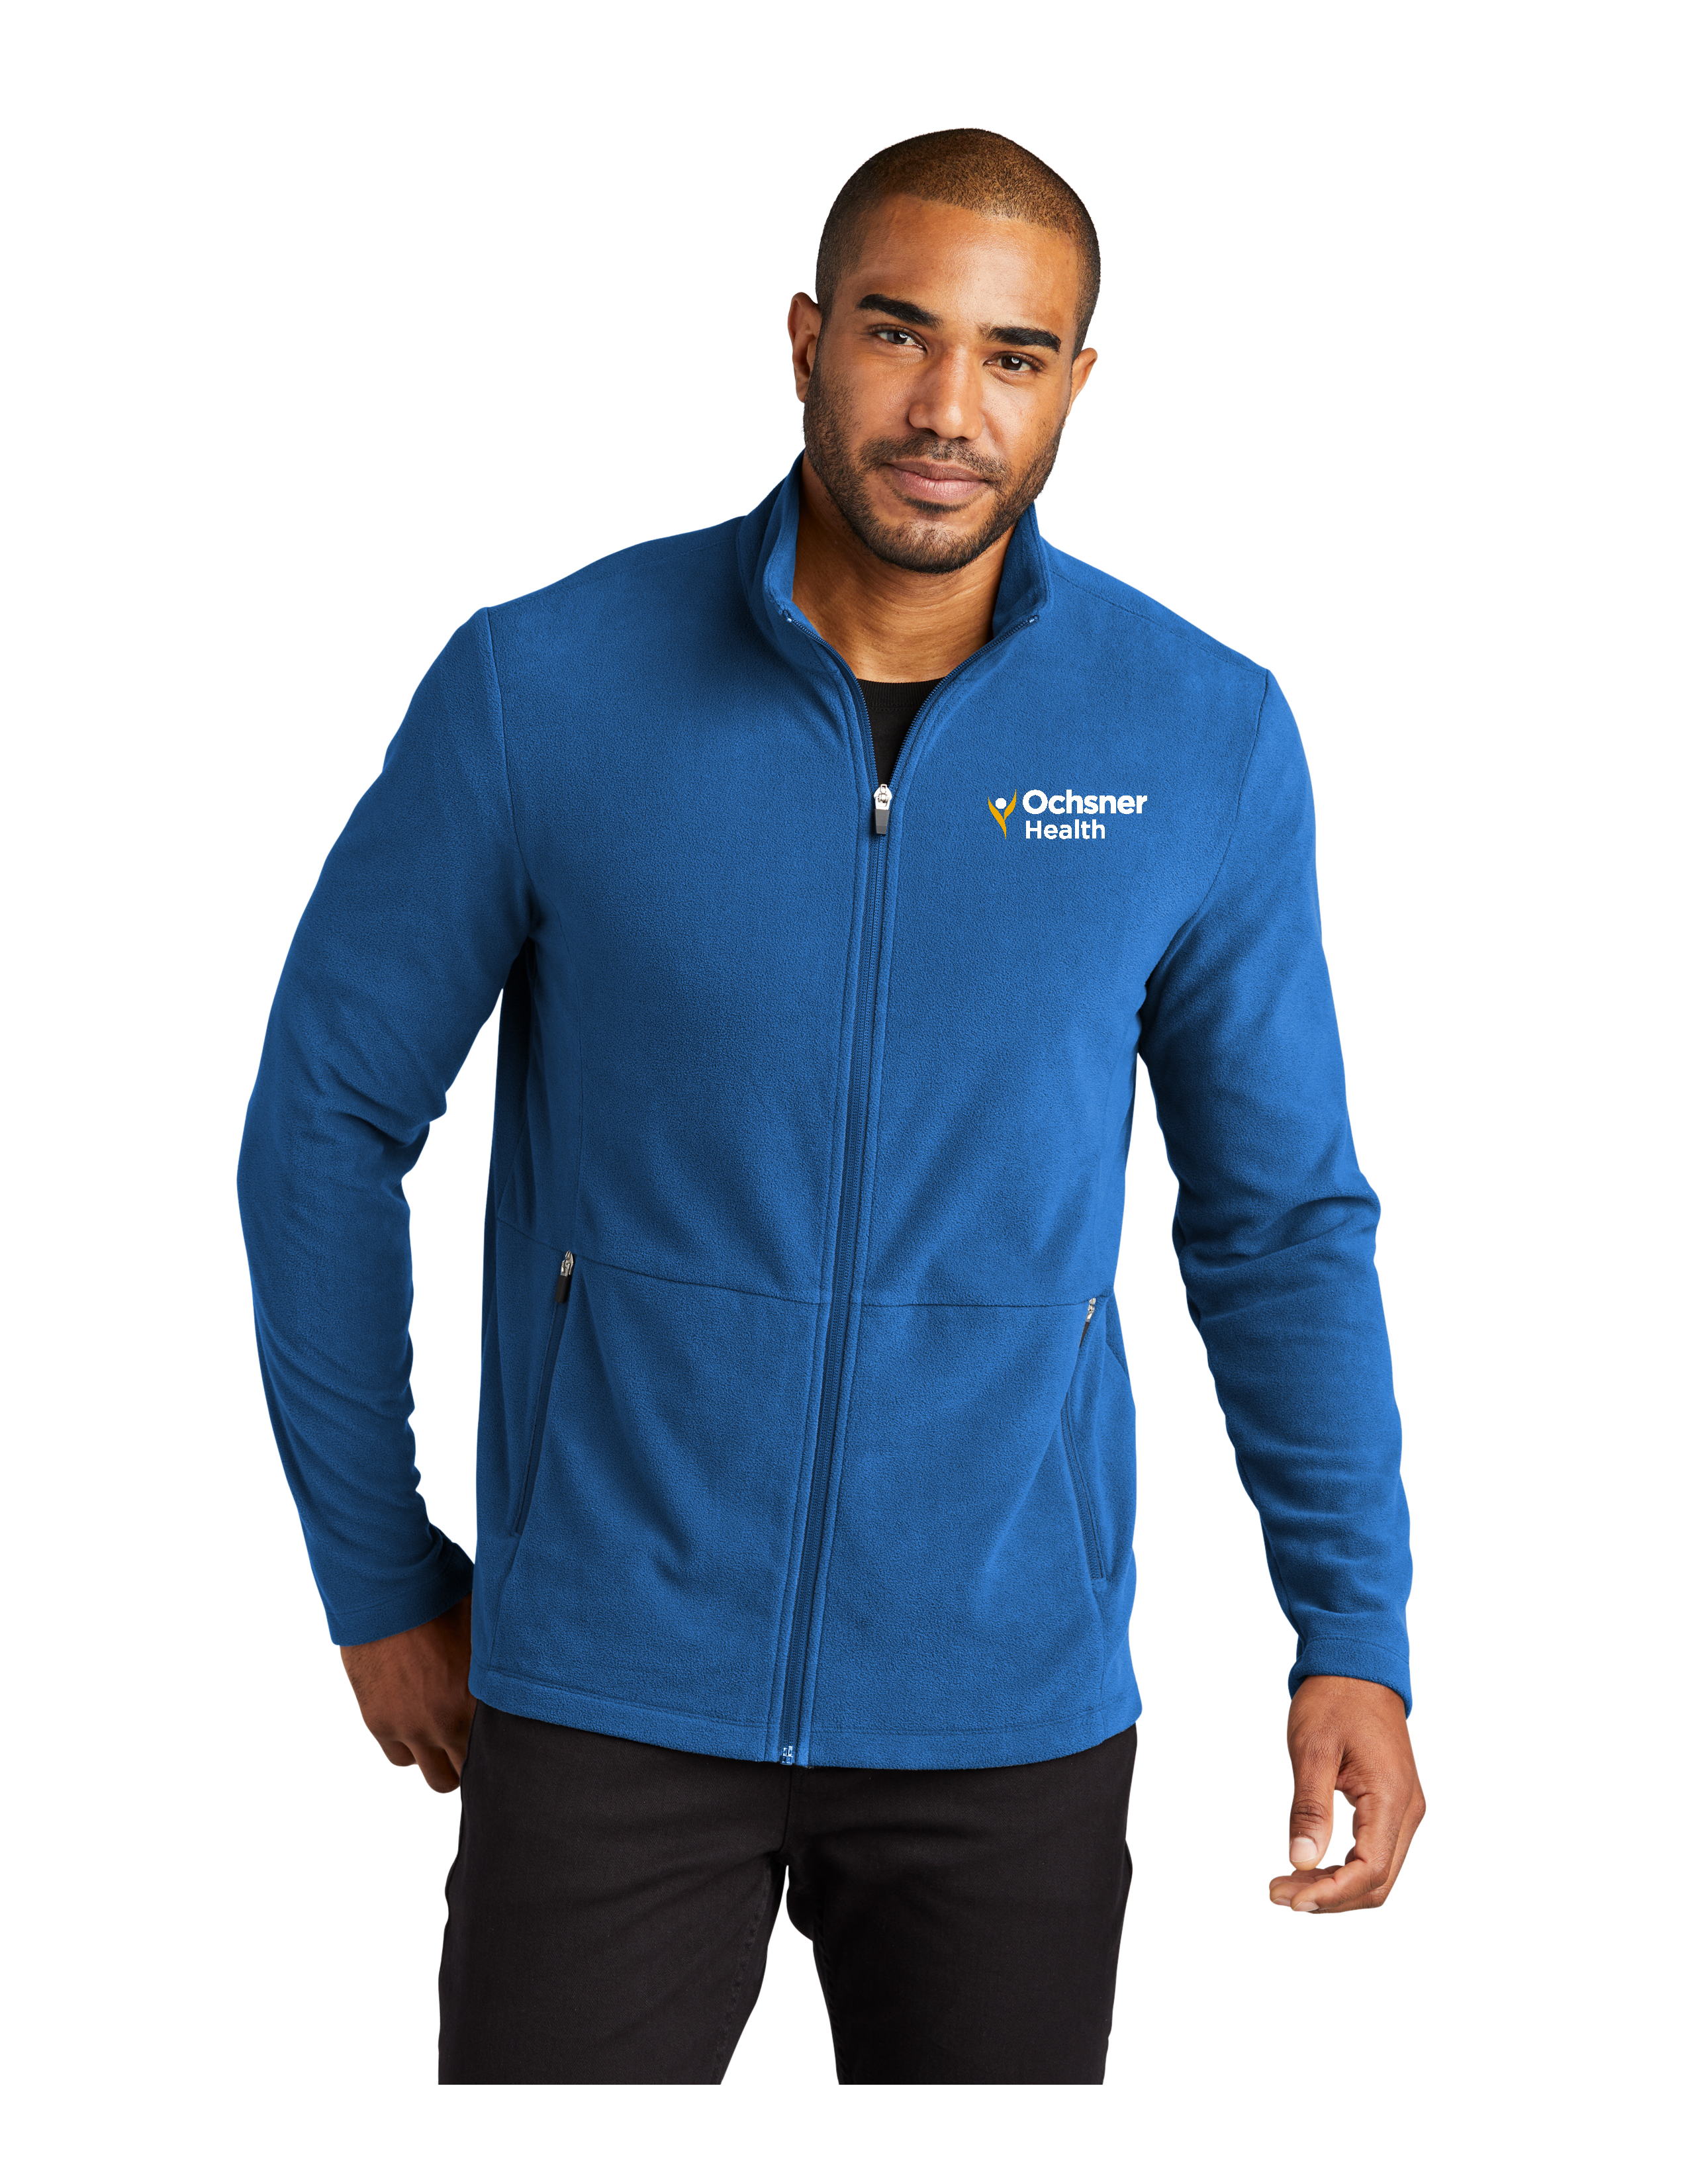 Men's Port Authority Microfleece, Royal Blue, large image number 1